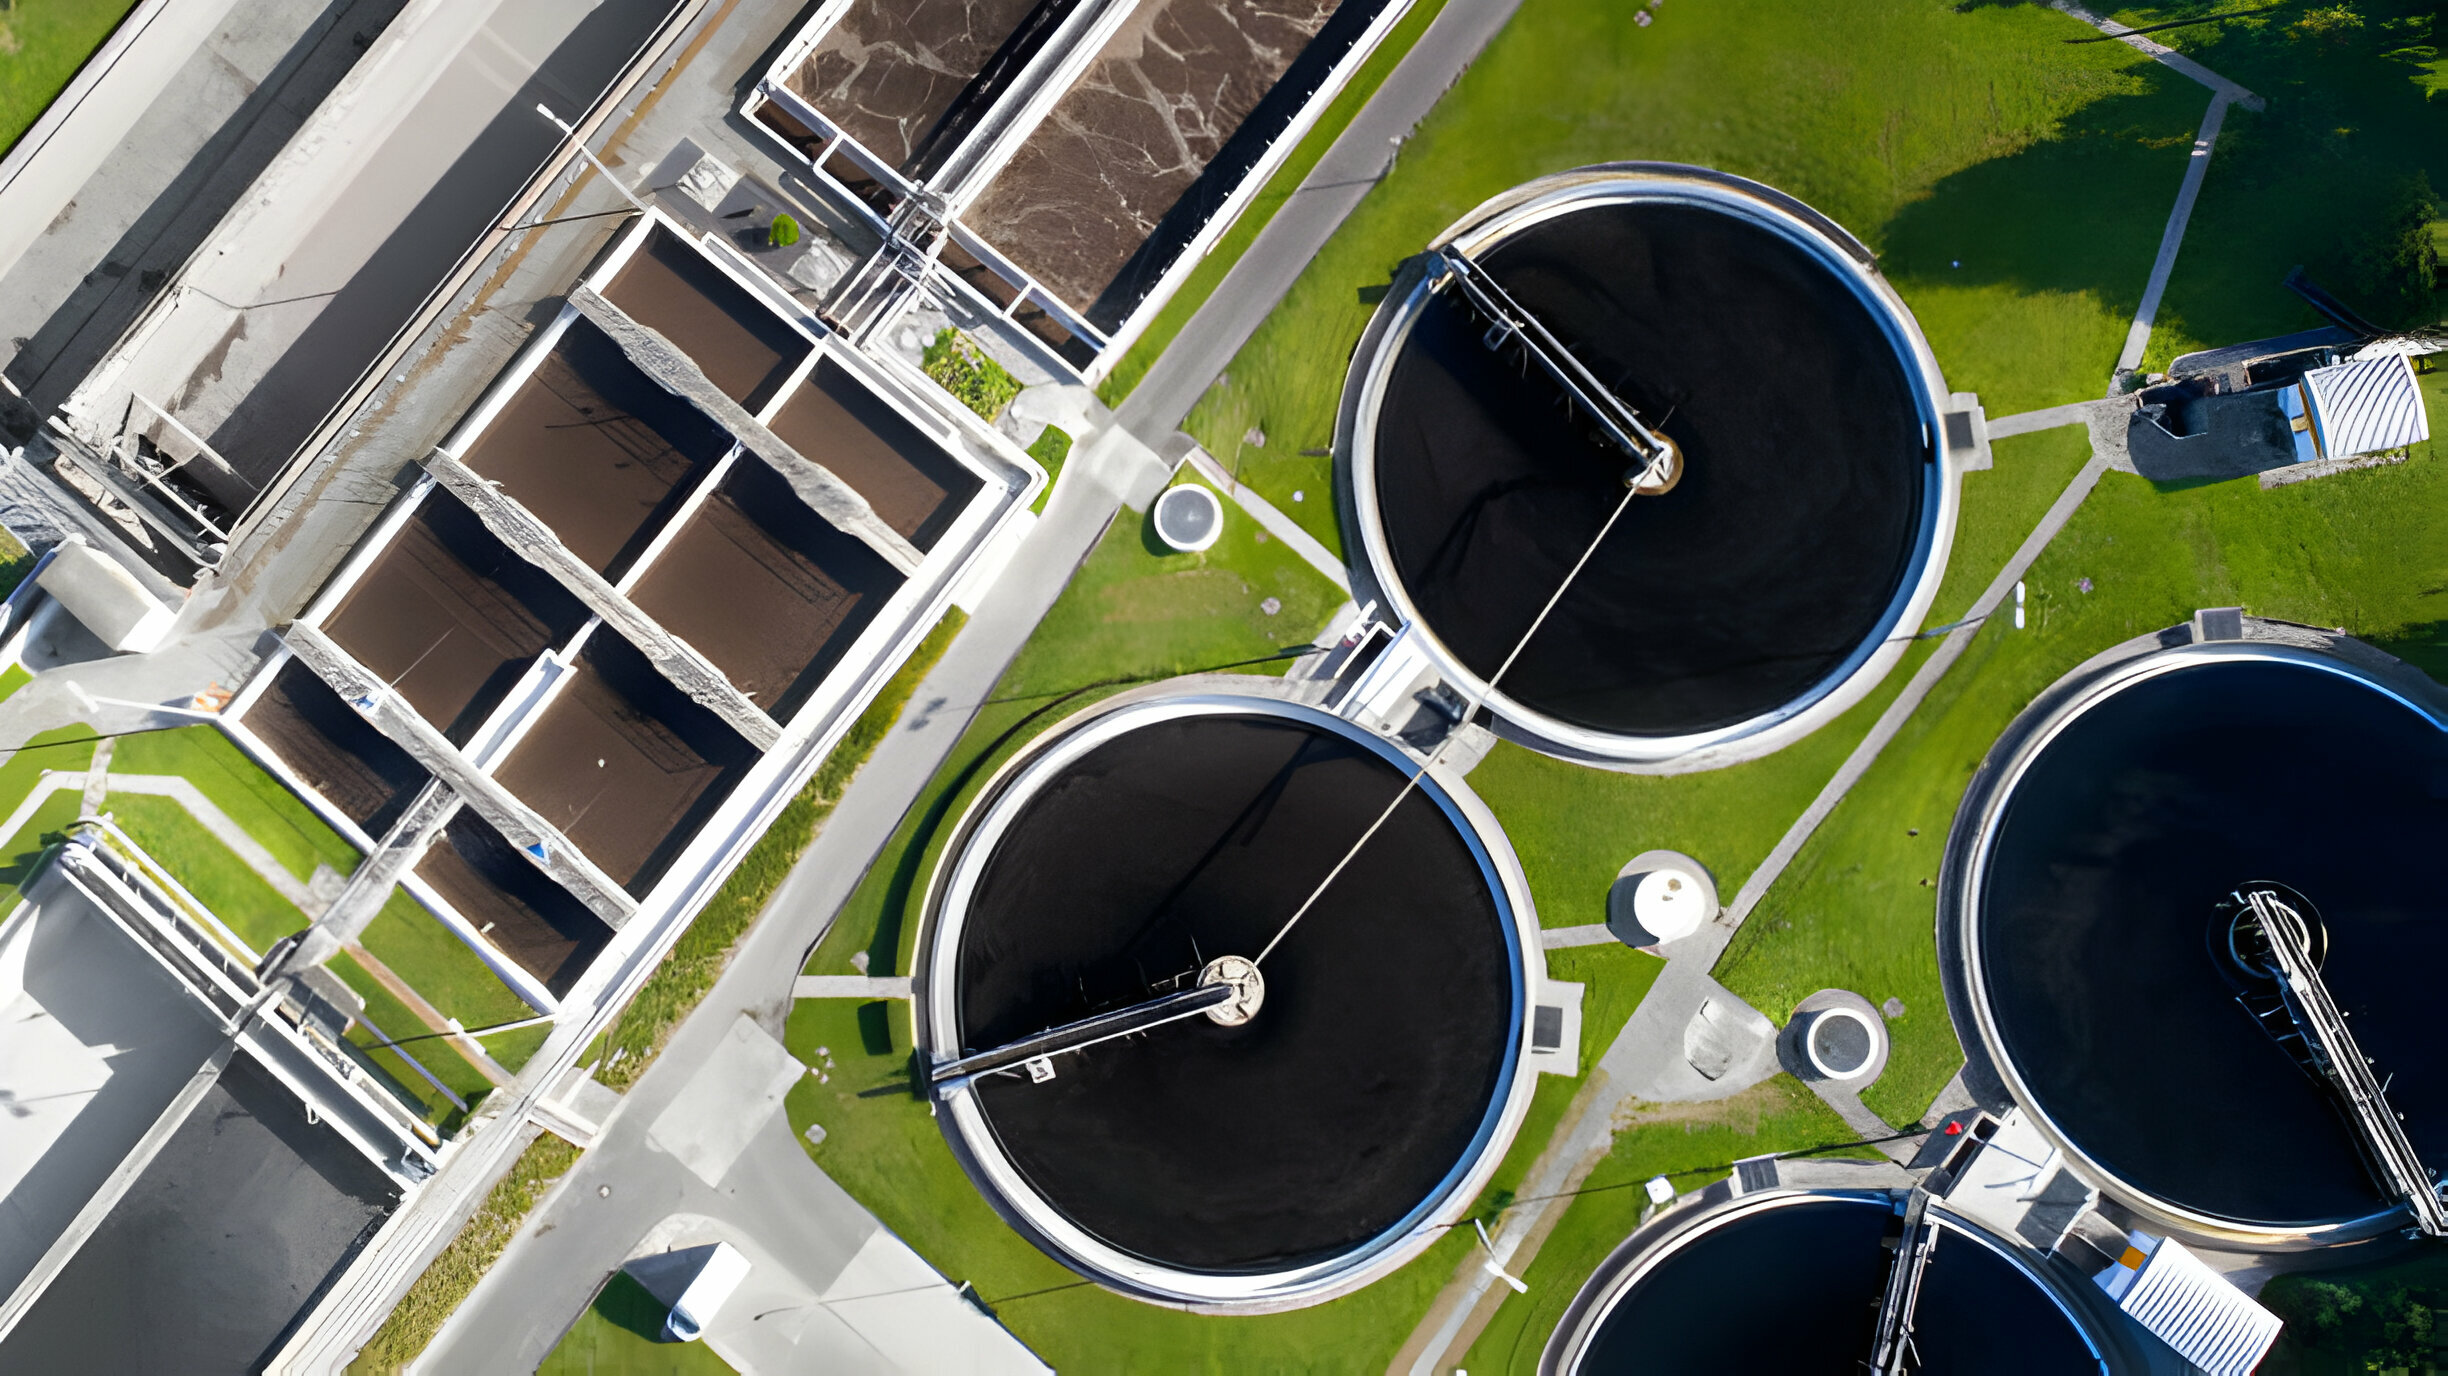 10 Tips for Optimizing Industrial Wastewater Treatment